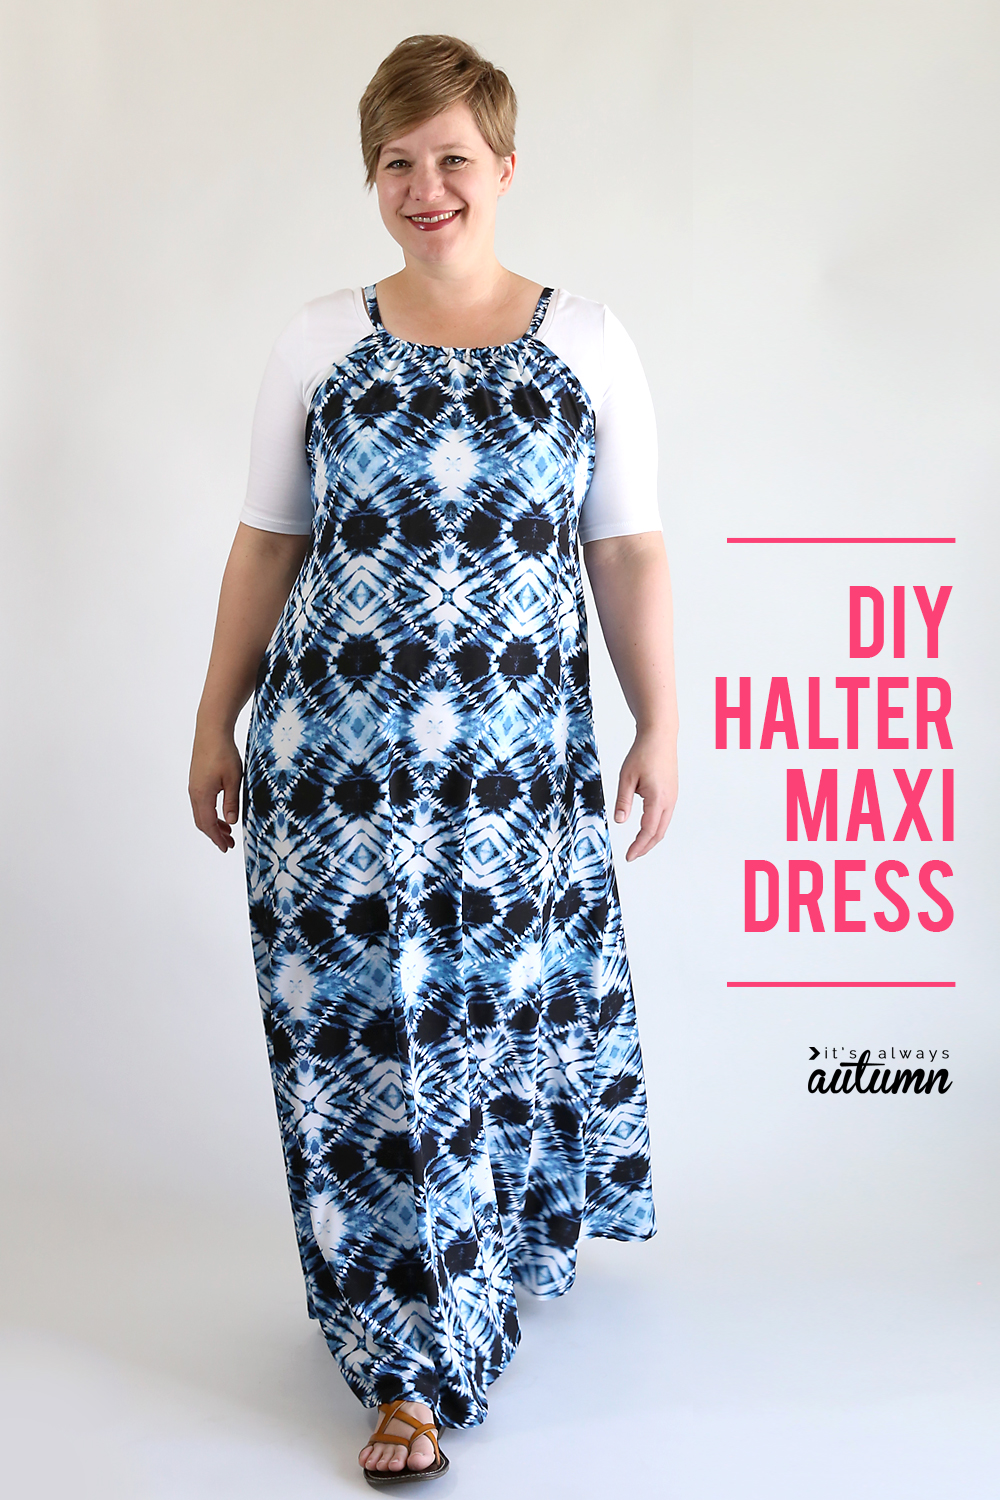 How to make a halter dress {easy sewing tutorial!} It's